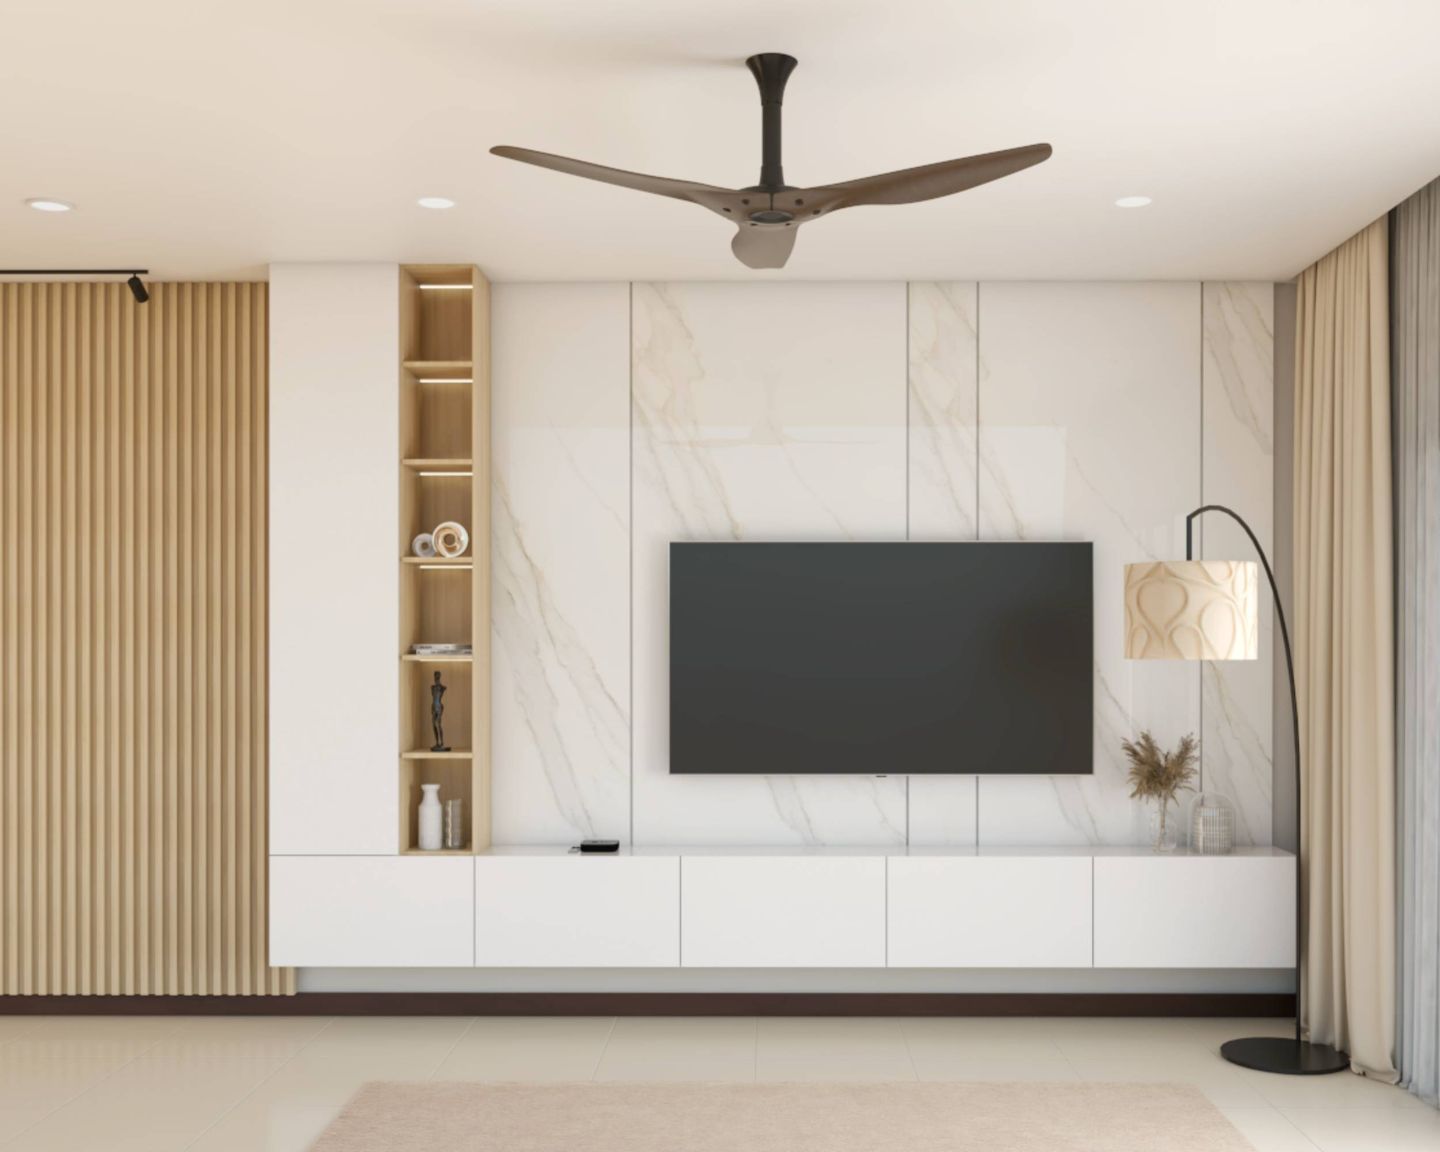 Wall-Mounted TV Cabinet With Open Stoage Units - Livspace